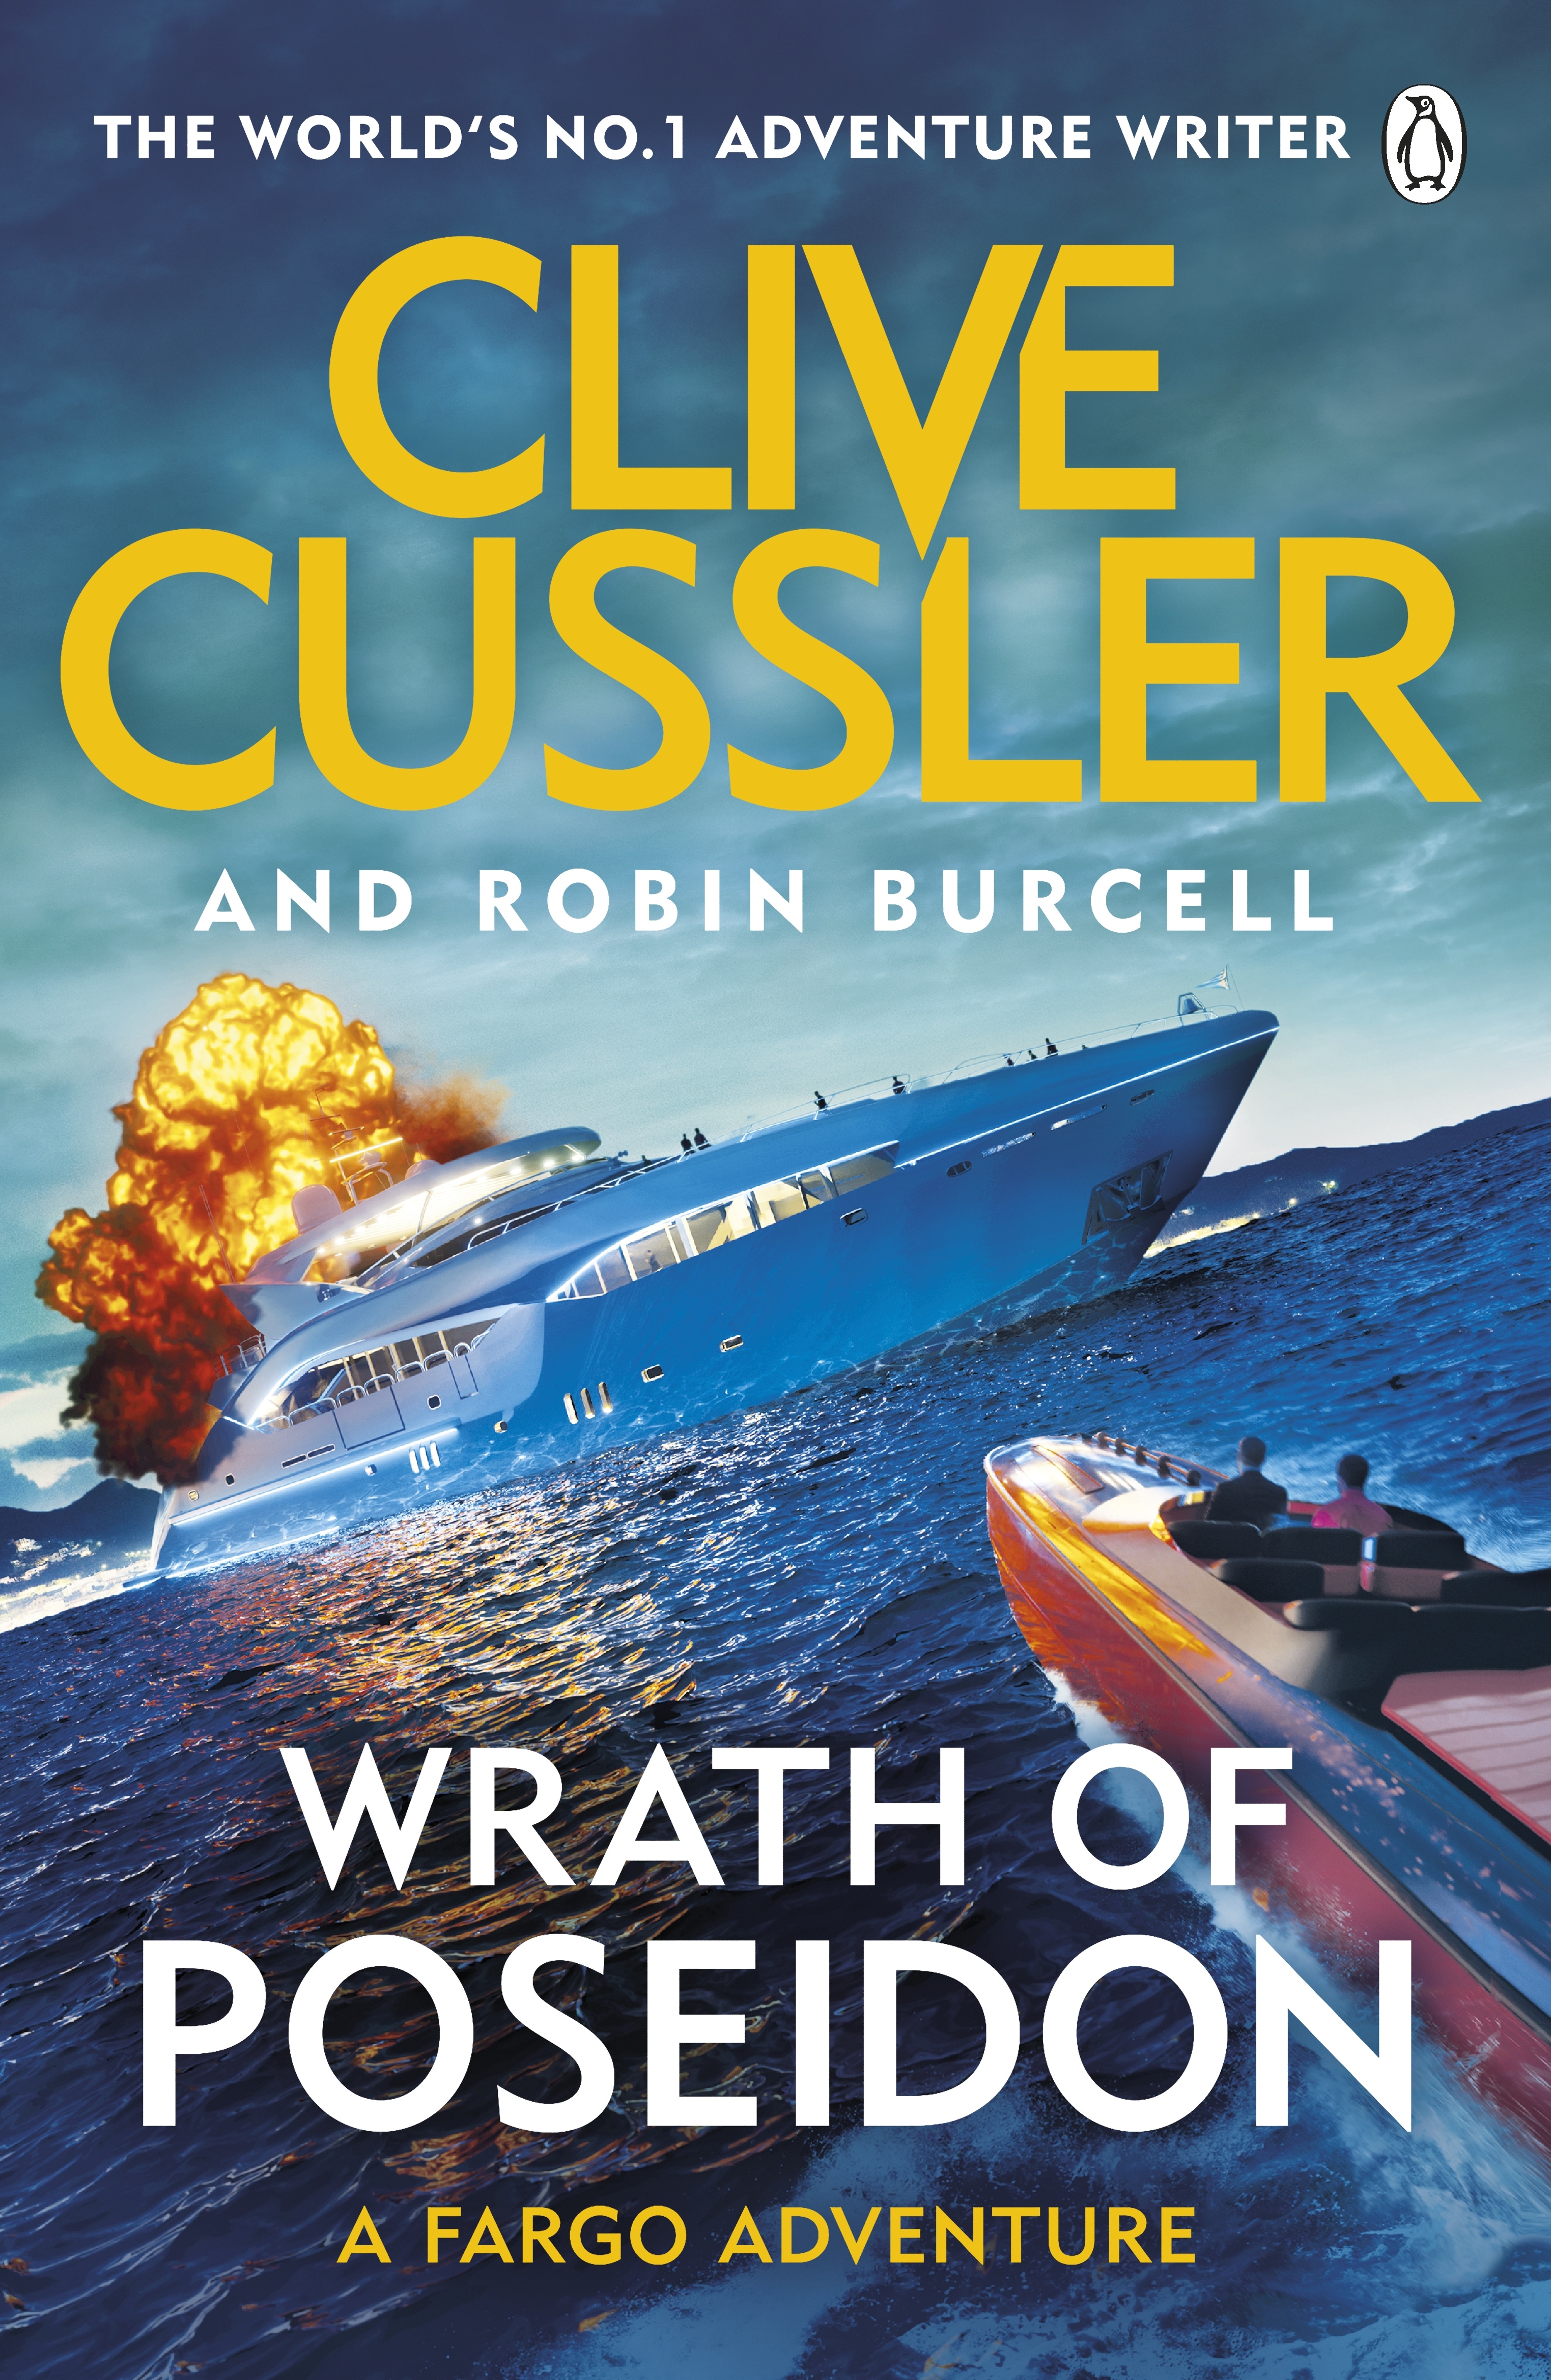 Book “Wrath of Poseidon” by Clive Cussler, Robin Burcell — April 29, 2021